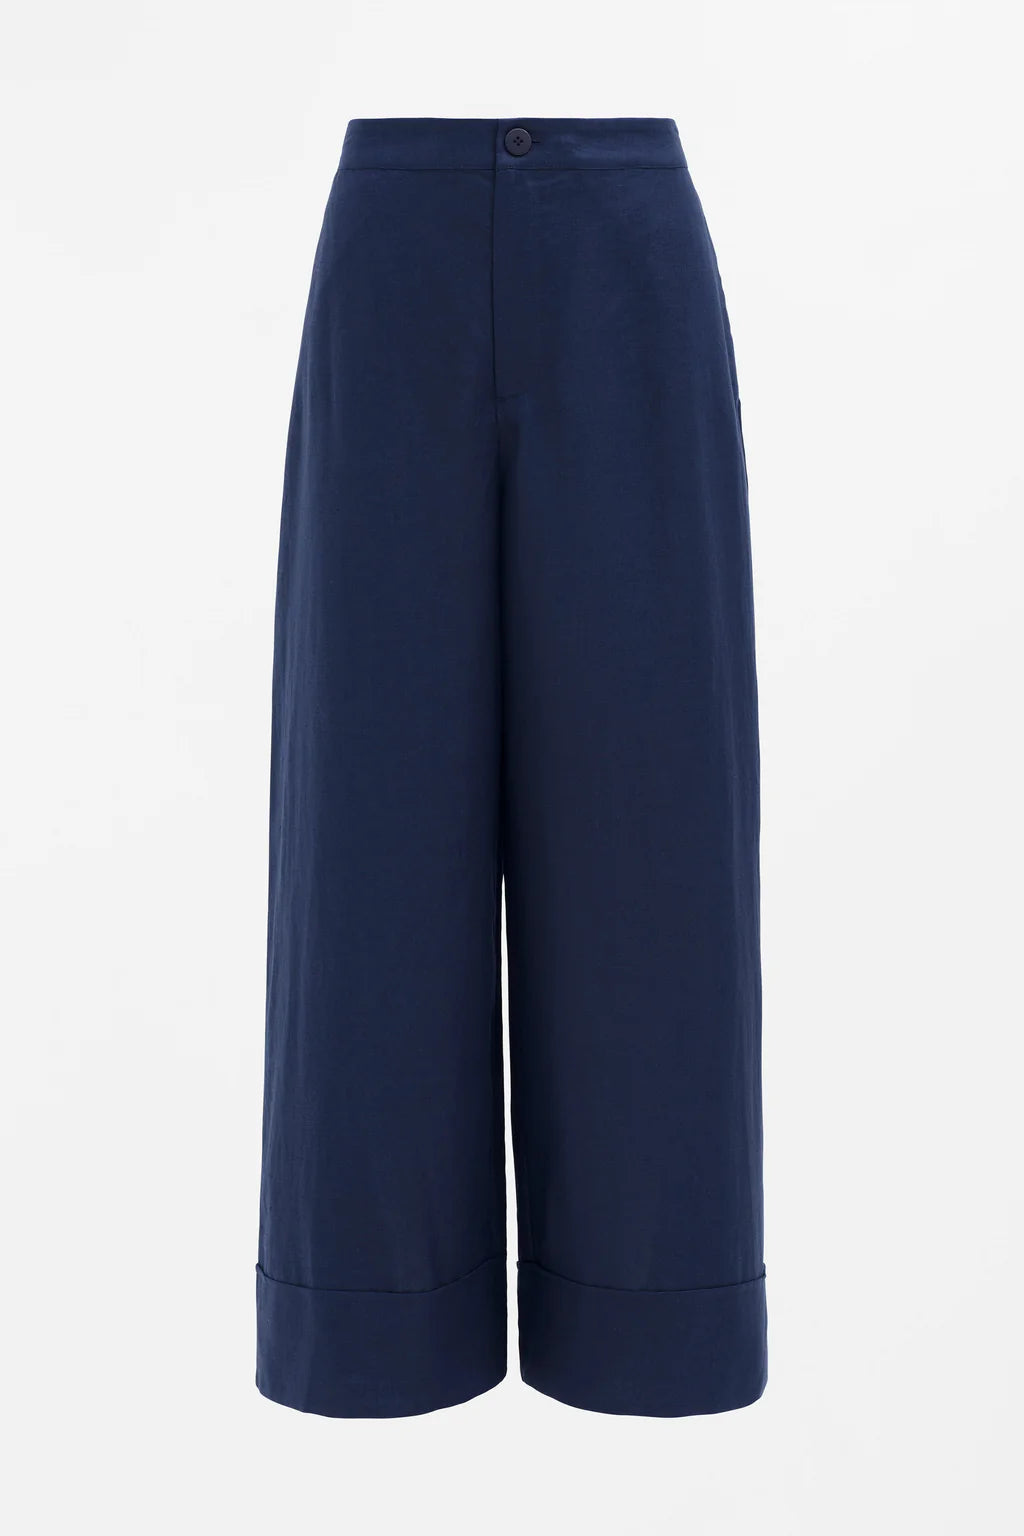 Anneli light linen pant, French linen wide leg with flat front and cuff in twilight navy blue.